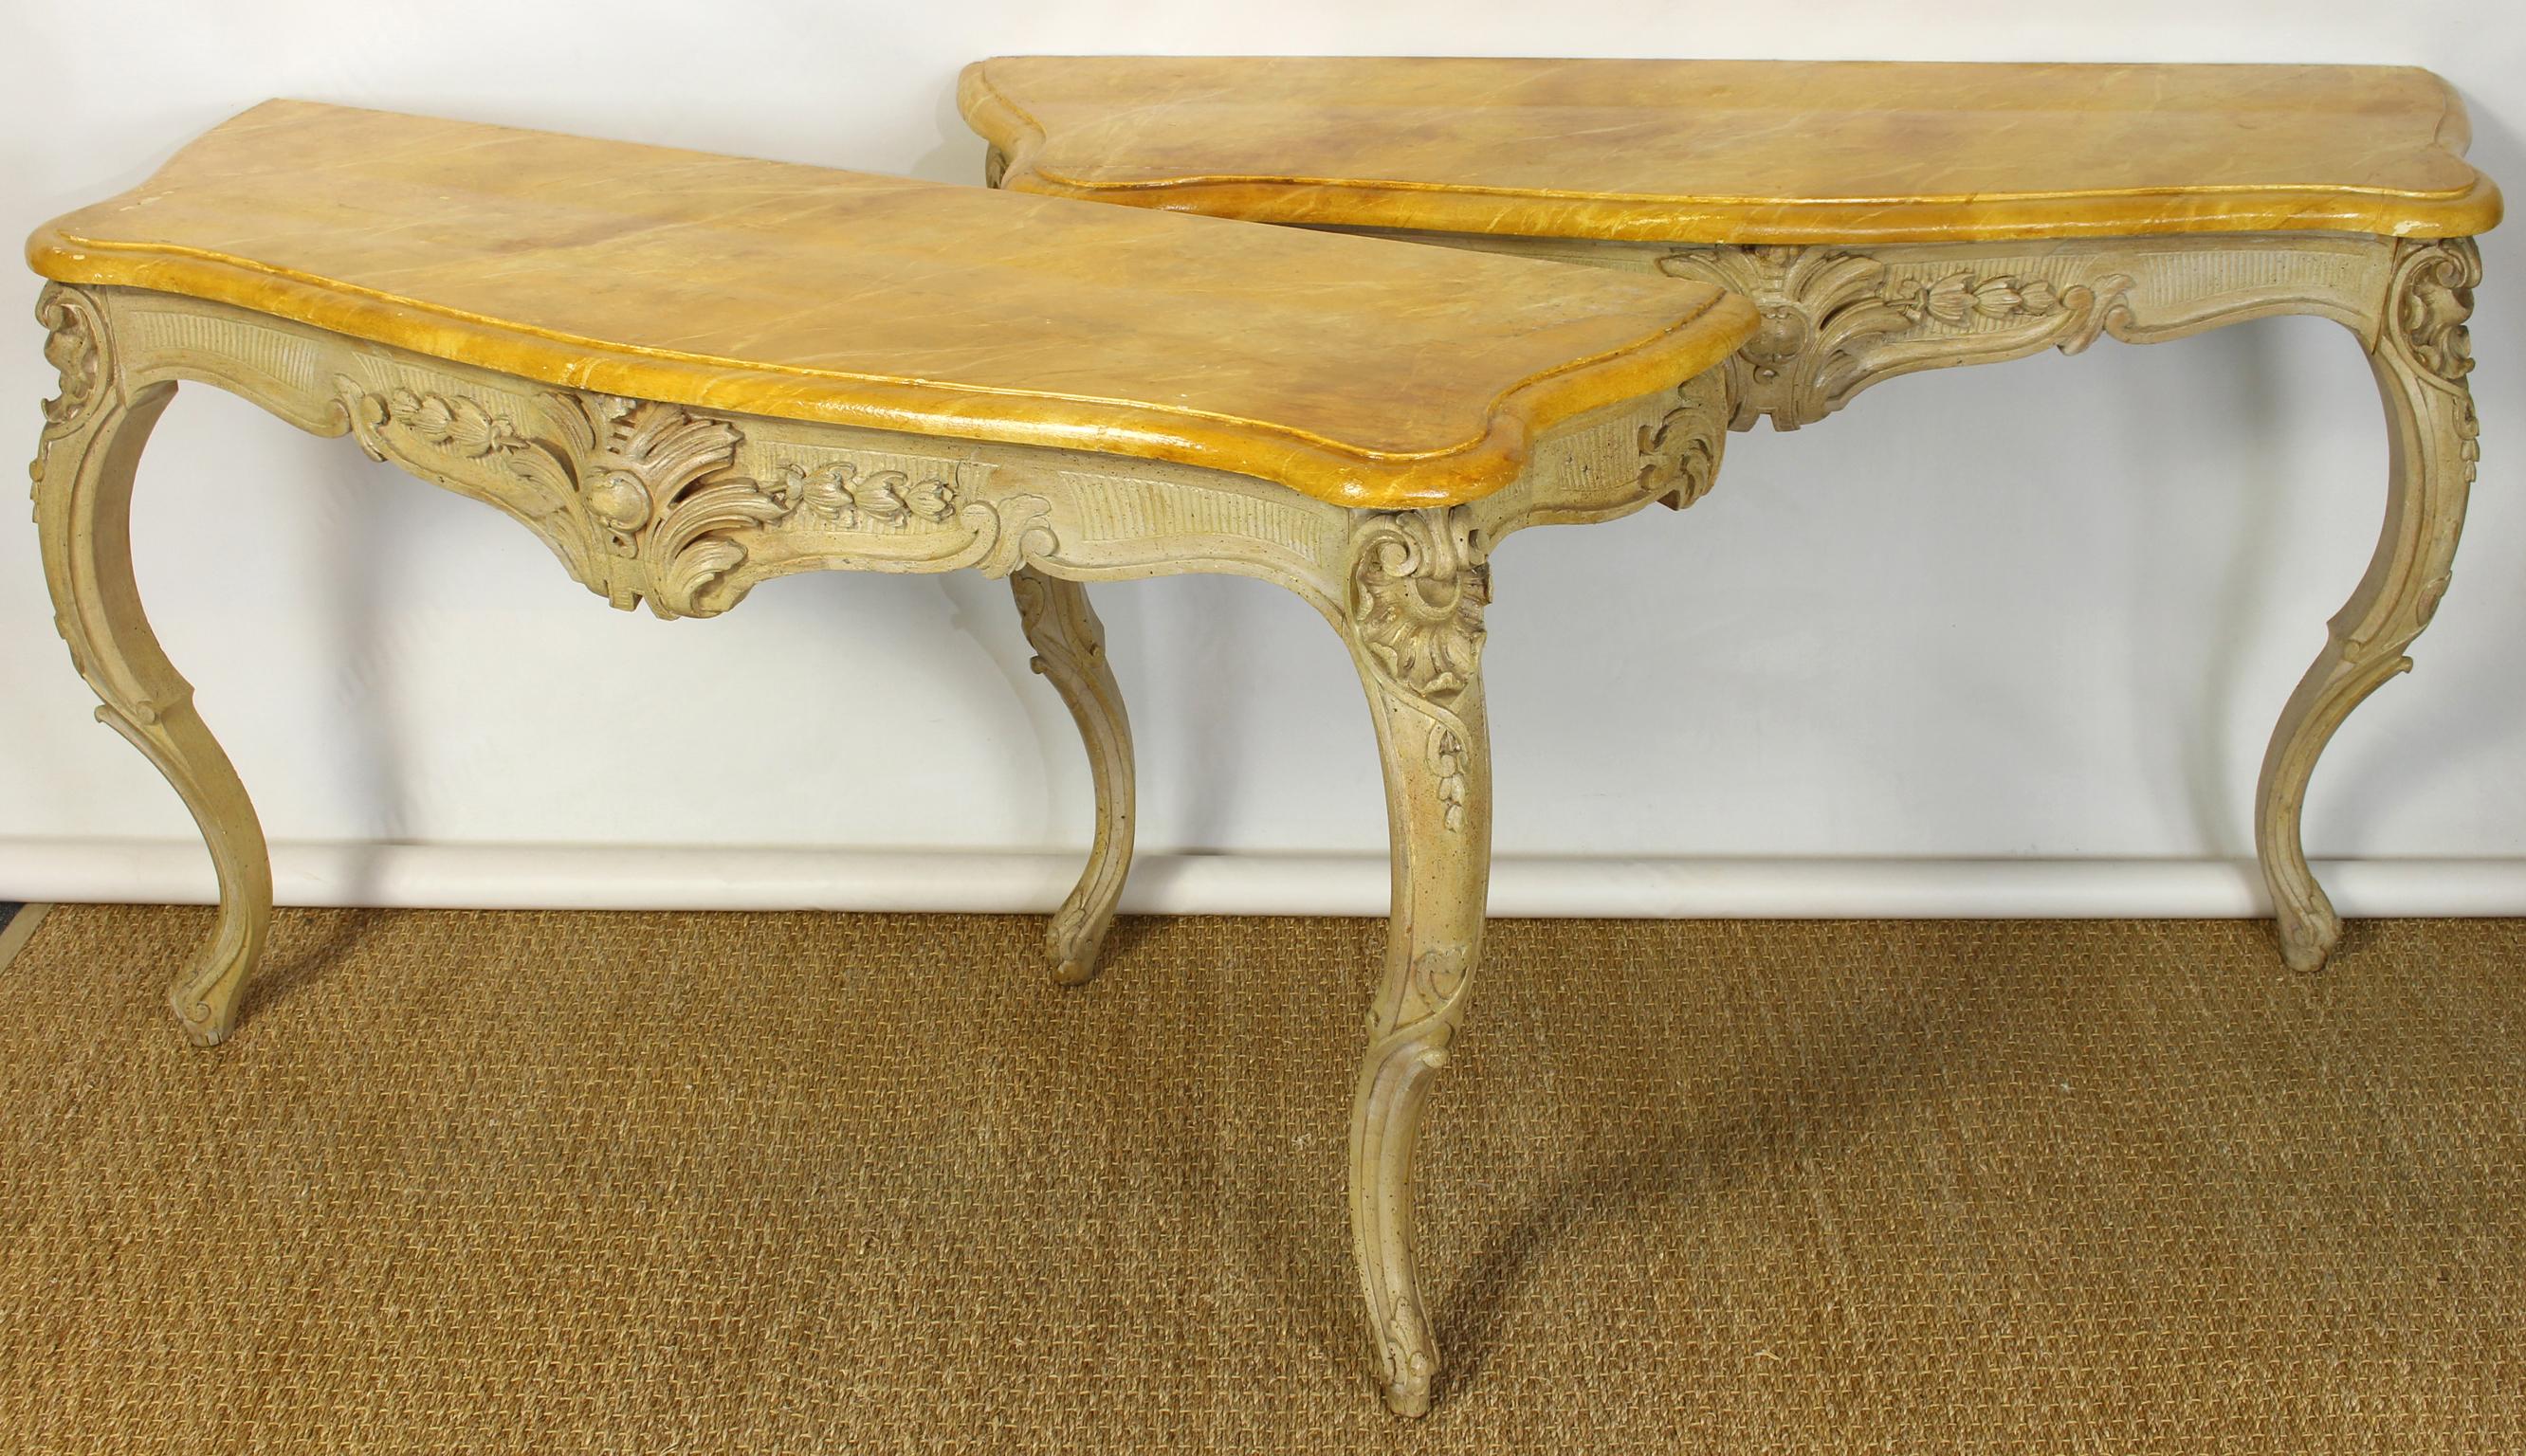 A lovely pair of carved and painted mid-19th century French wall mounted console tables with faux marble tops.